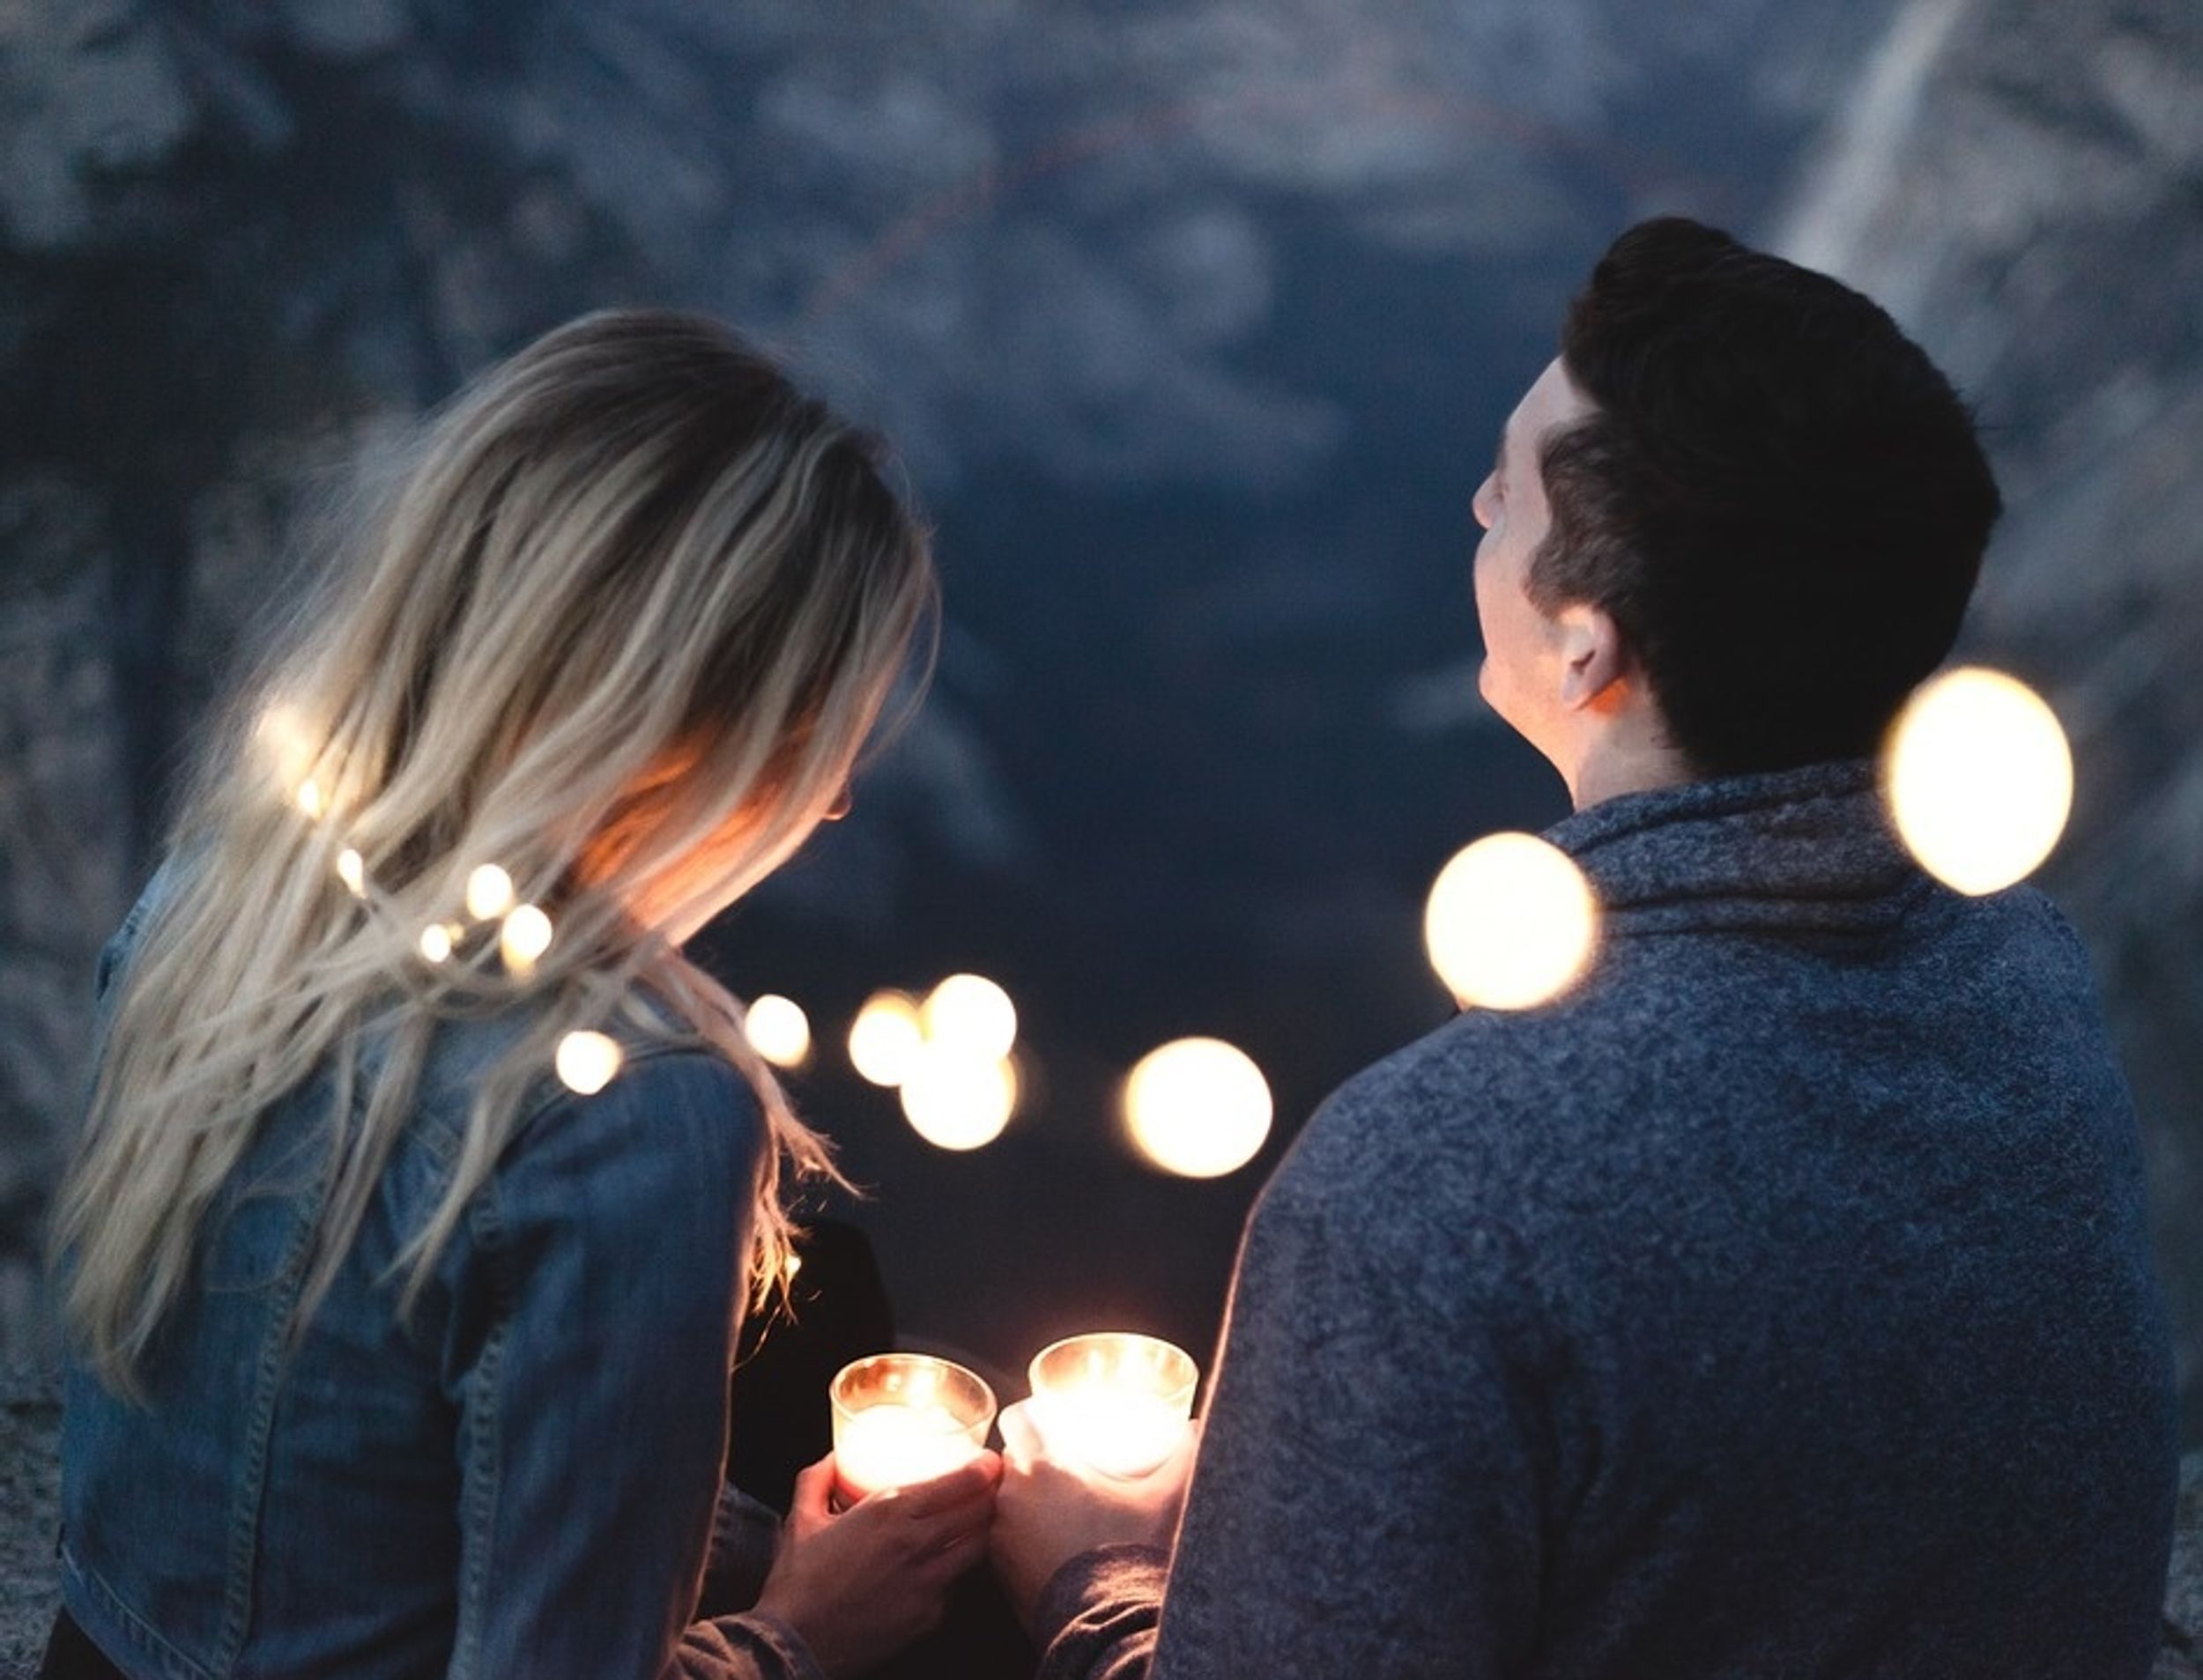 People Reveal The Most Random Ways They've Met Someone They Ended Up Dating